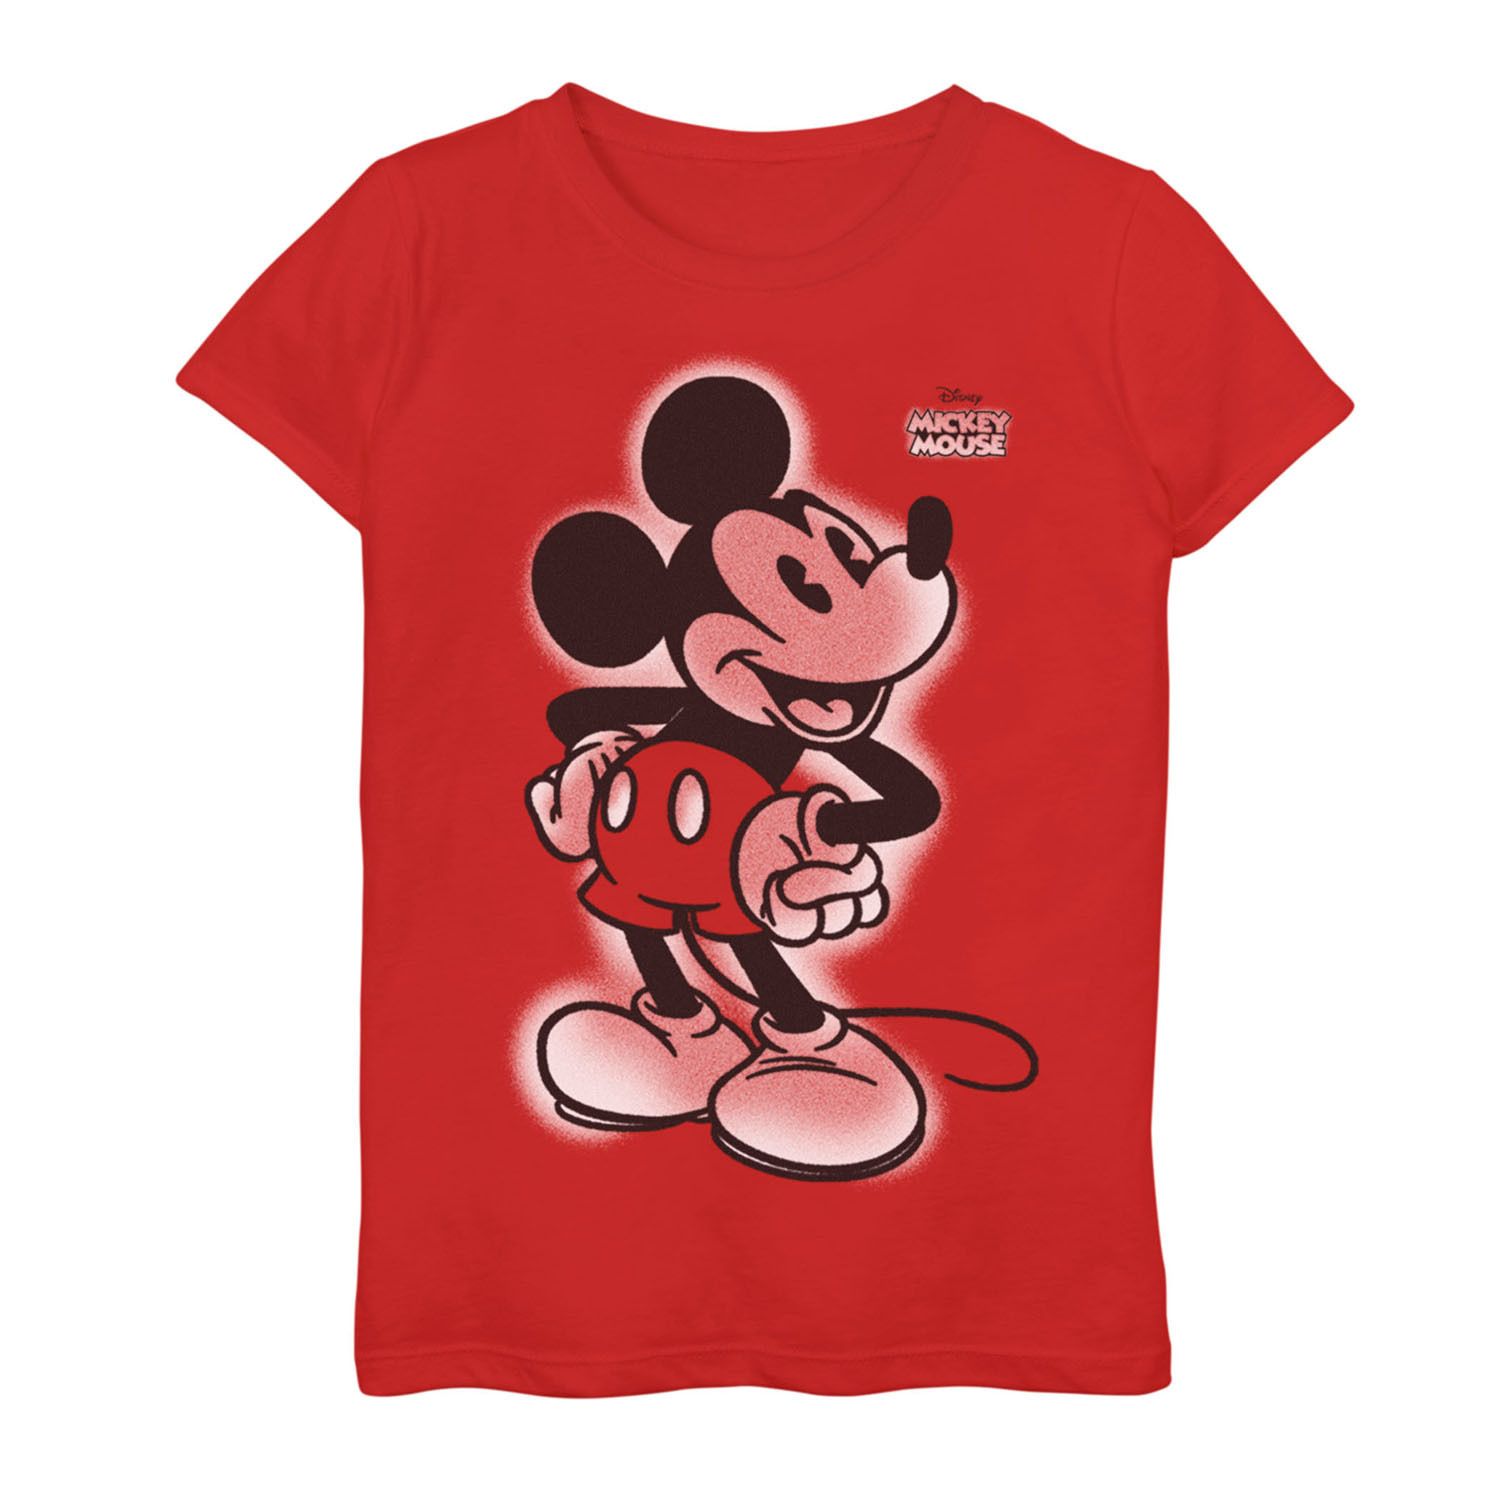 Image for Disney Girls 7-16 Mickey Mouse Smiling Vintage Portrait Graphic Tee at Kohl's.